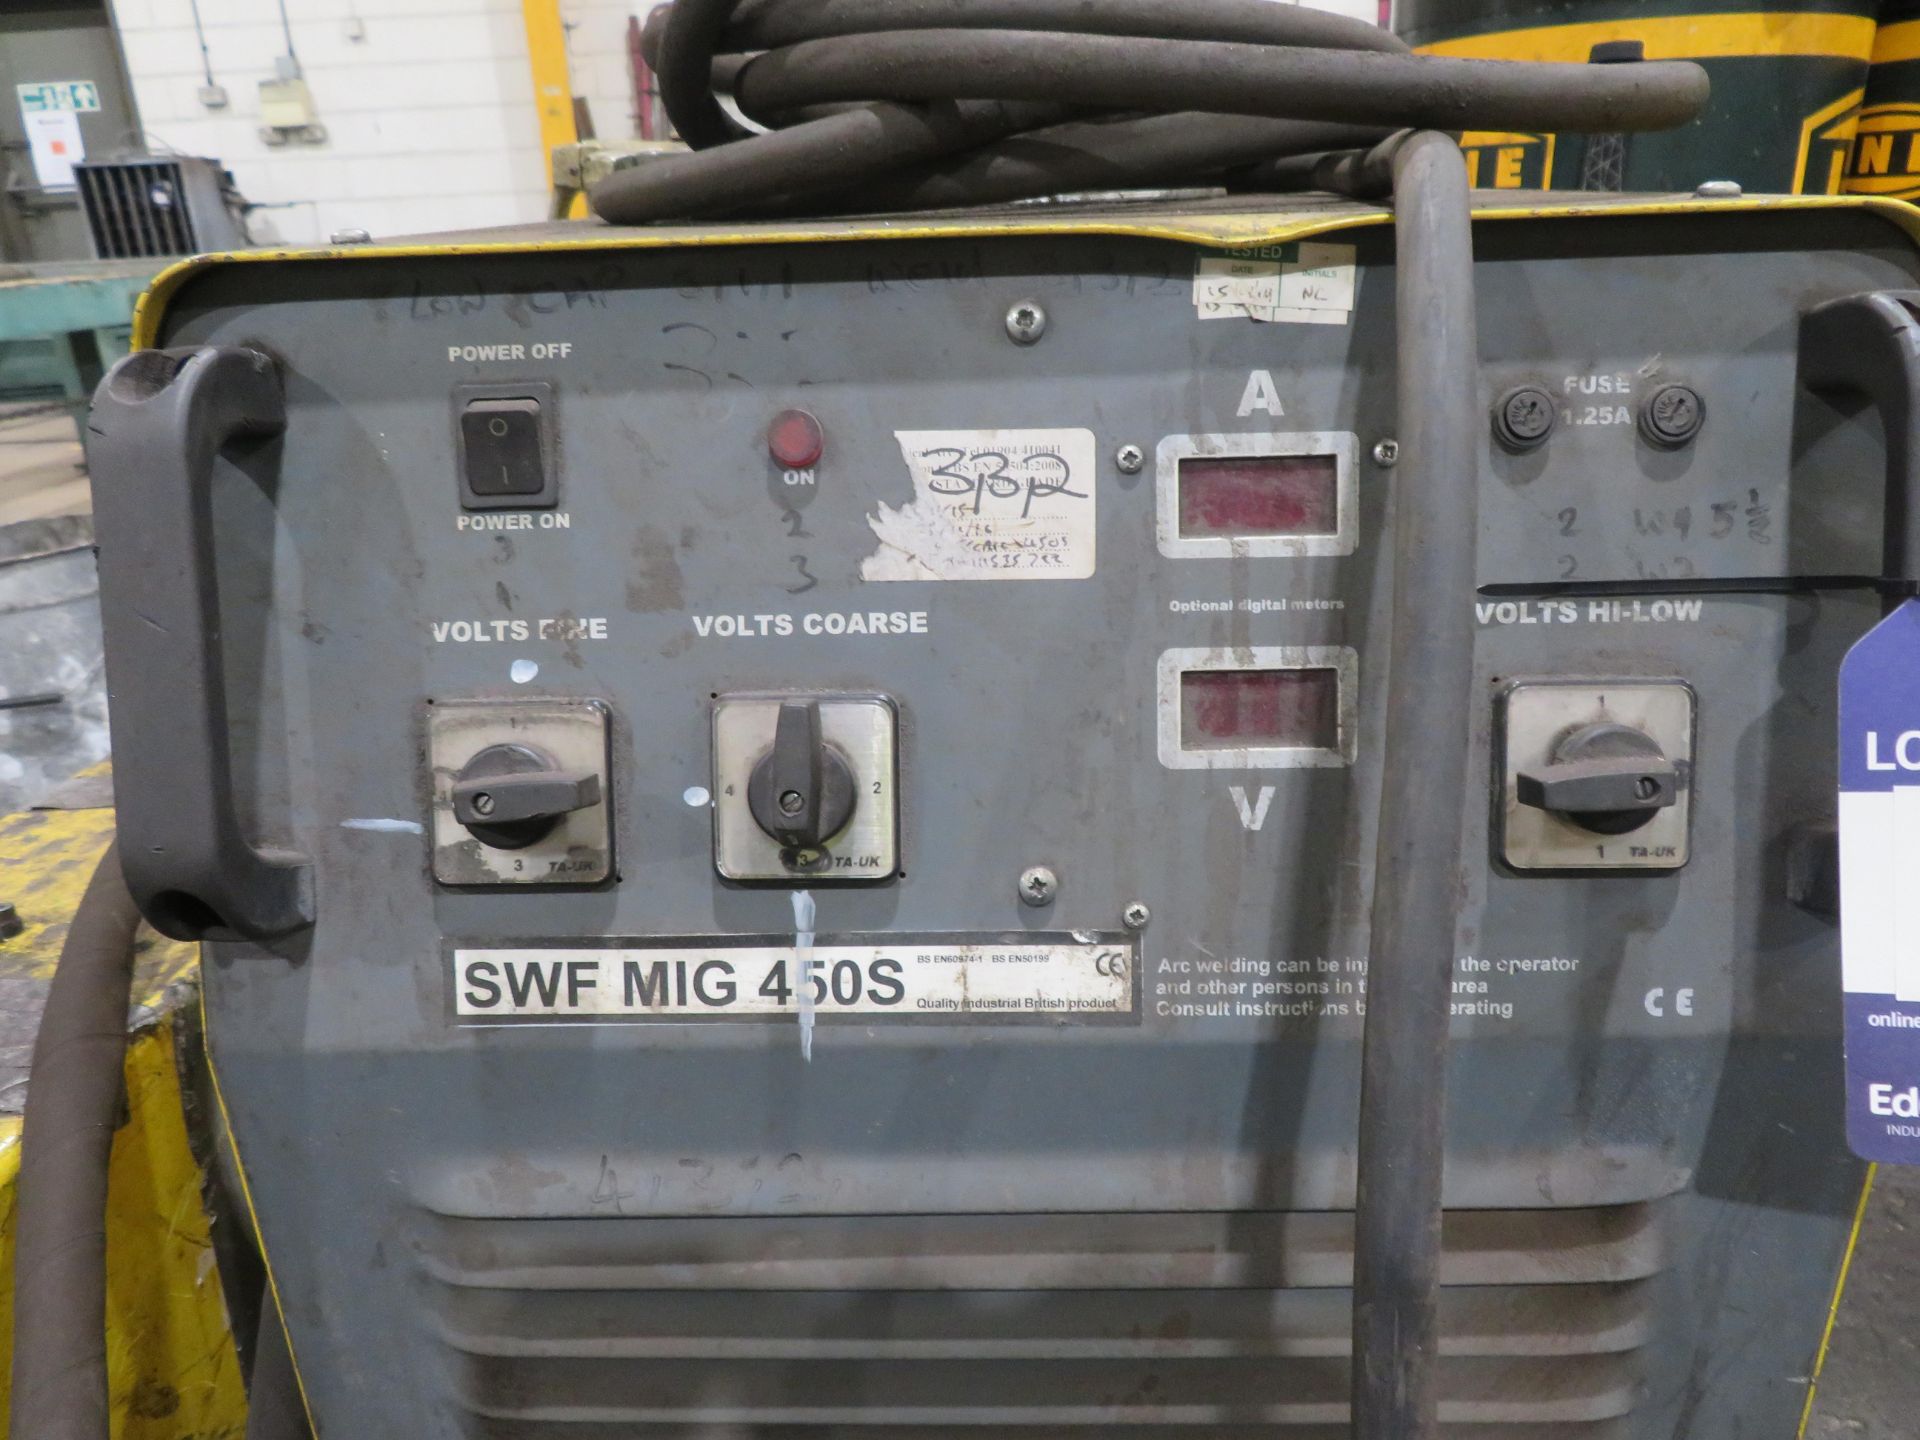 Tecarc SWF Mig 450s welder with F41G wire feed - Image 2 of 3